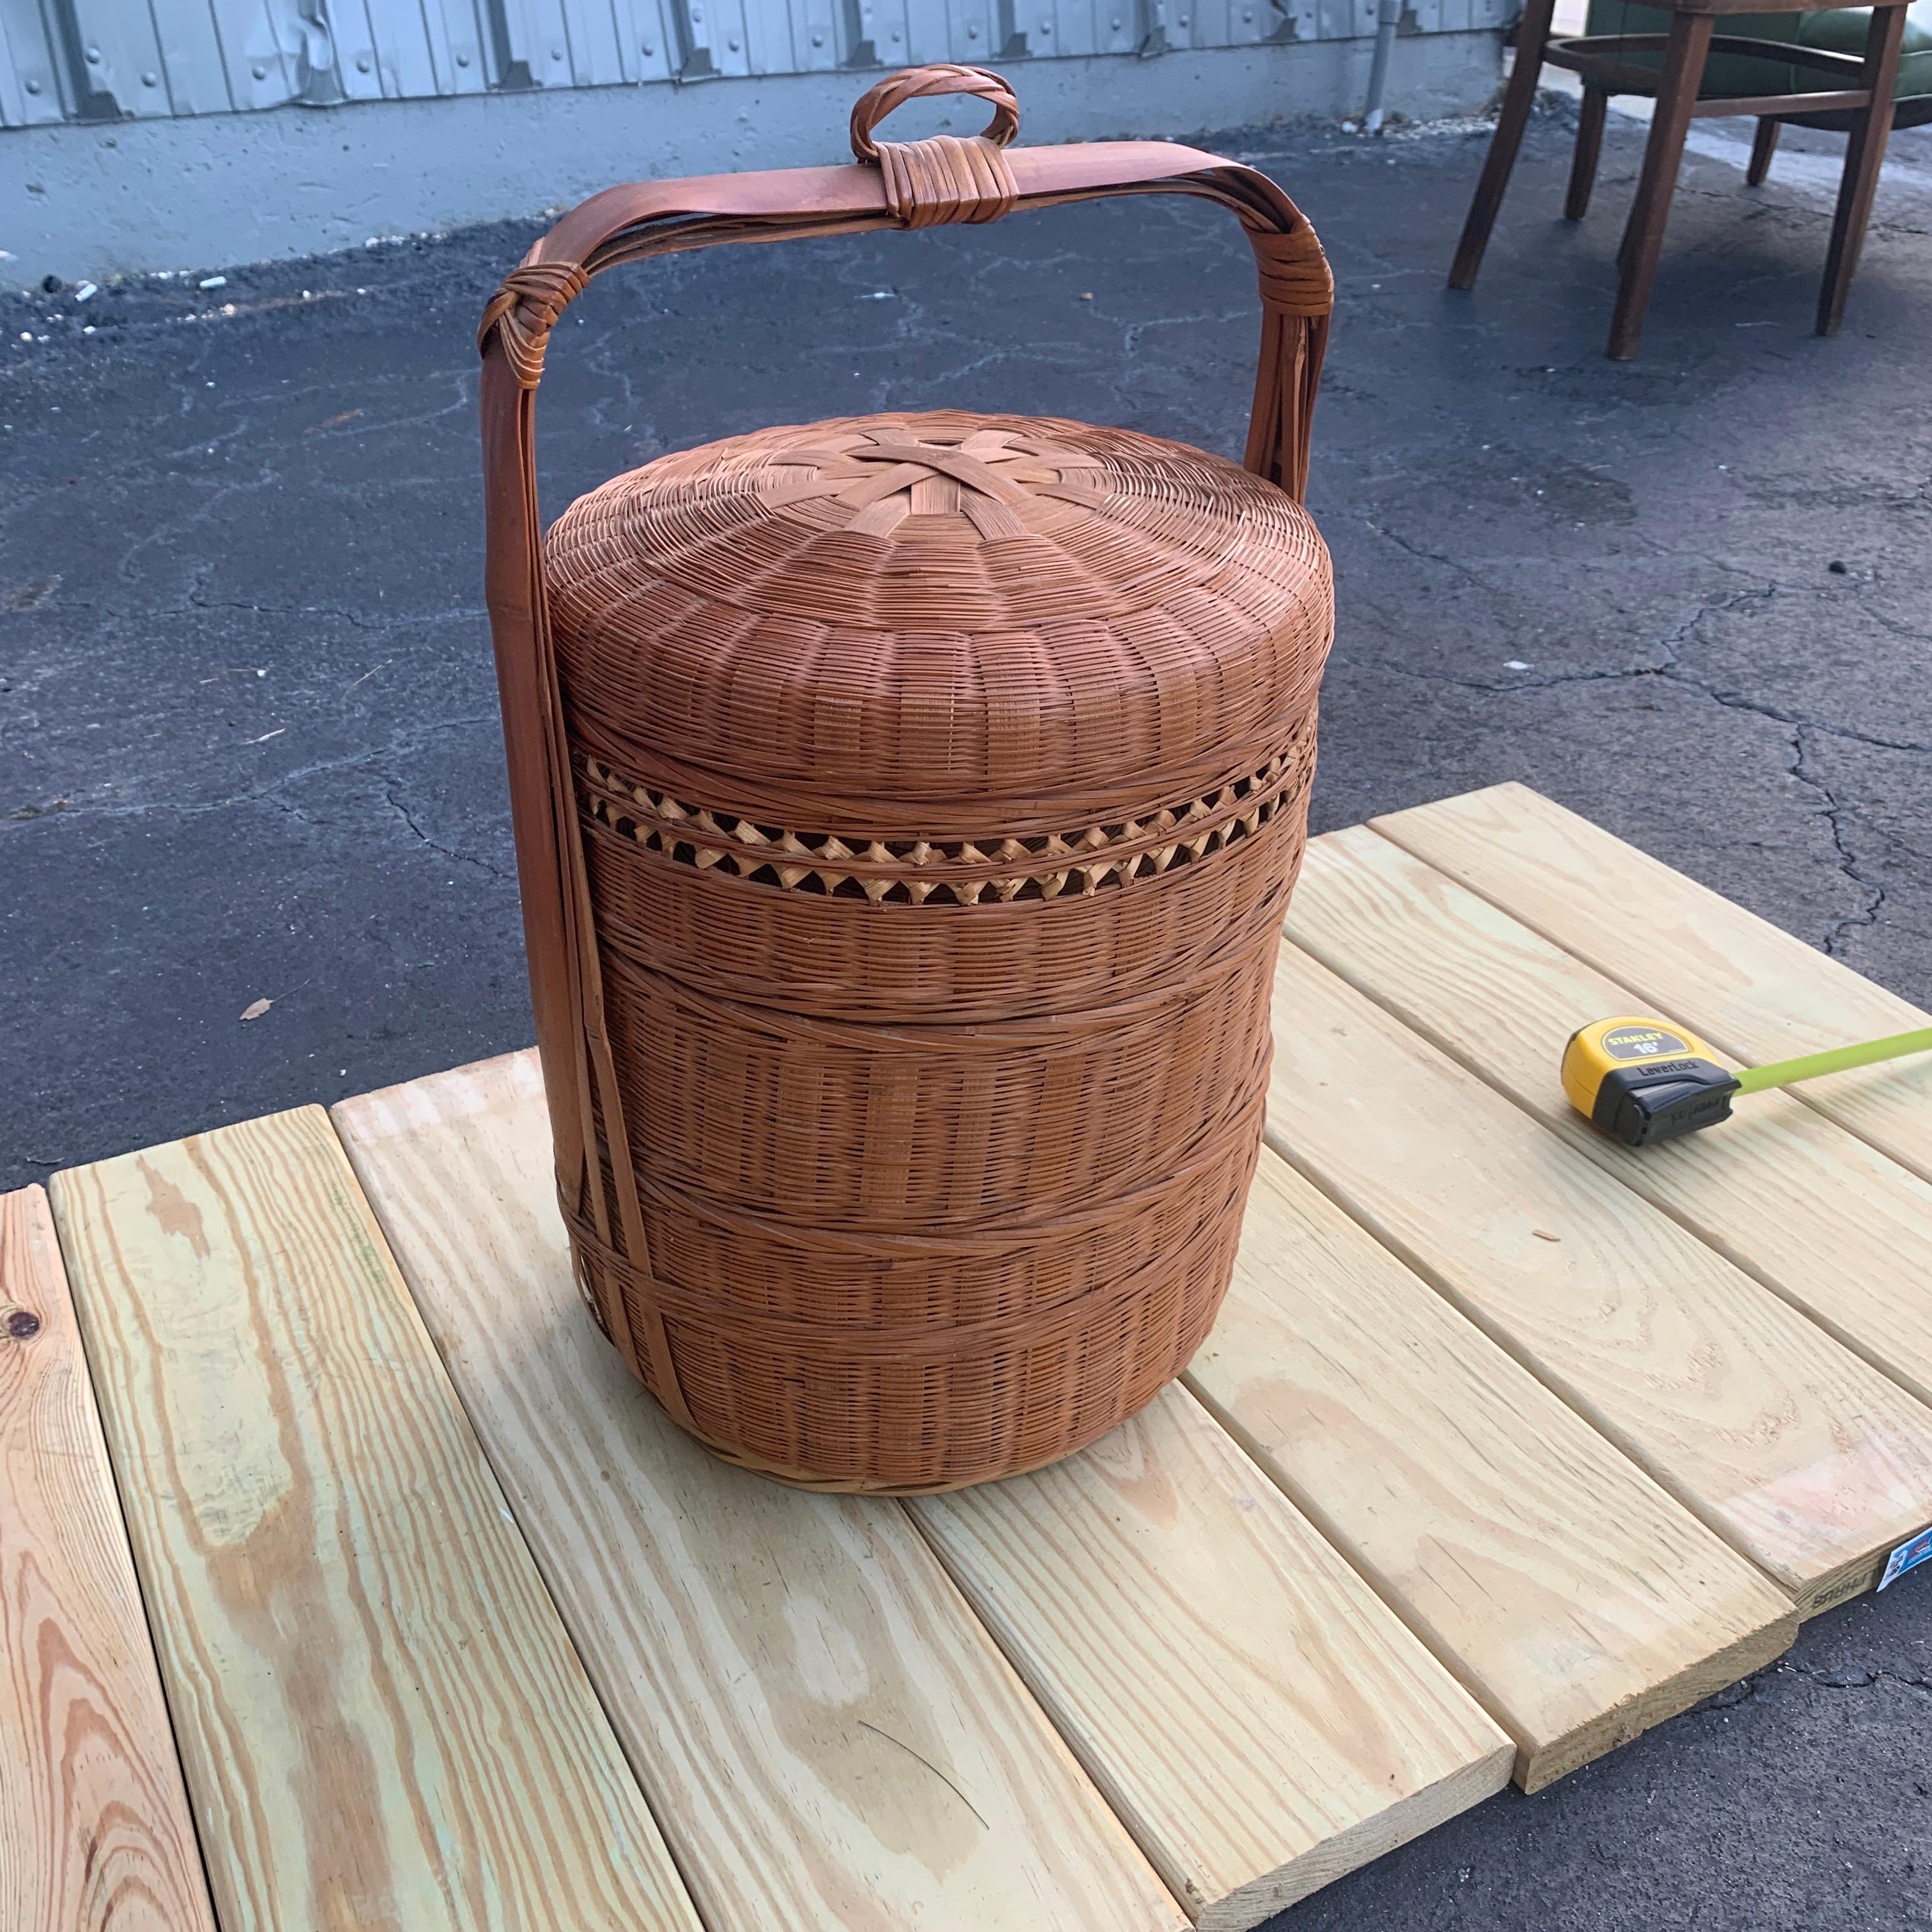 Vintage Wedding basket from Philippines in great shape. This item was purchased from the estate of a woman who taught in Philippines for a number of years from the 1970s to 1980s. The item has little to no signs of wear or damage. Includes three